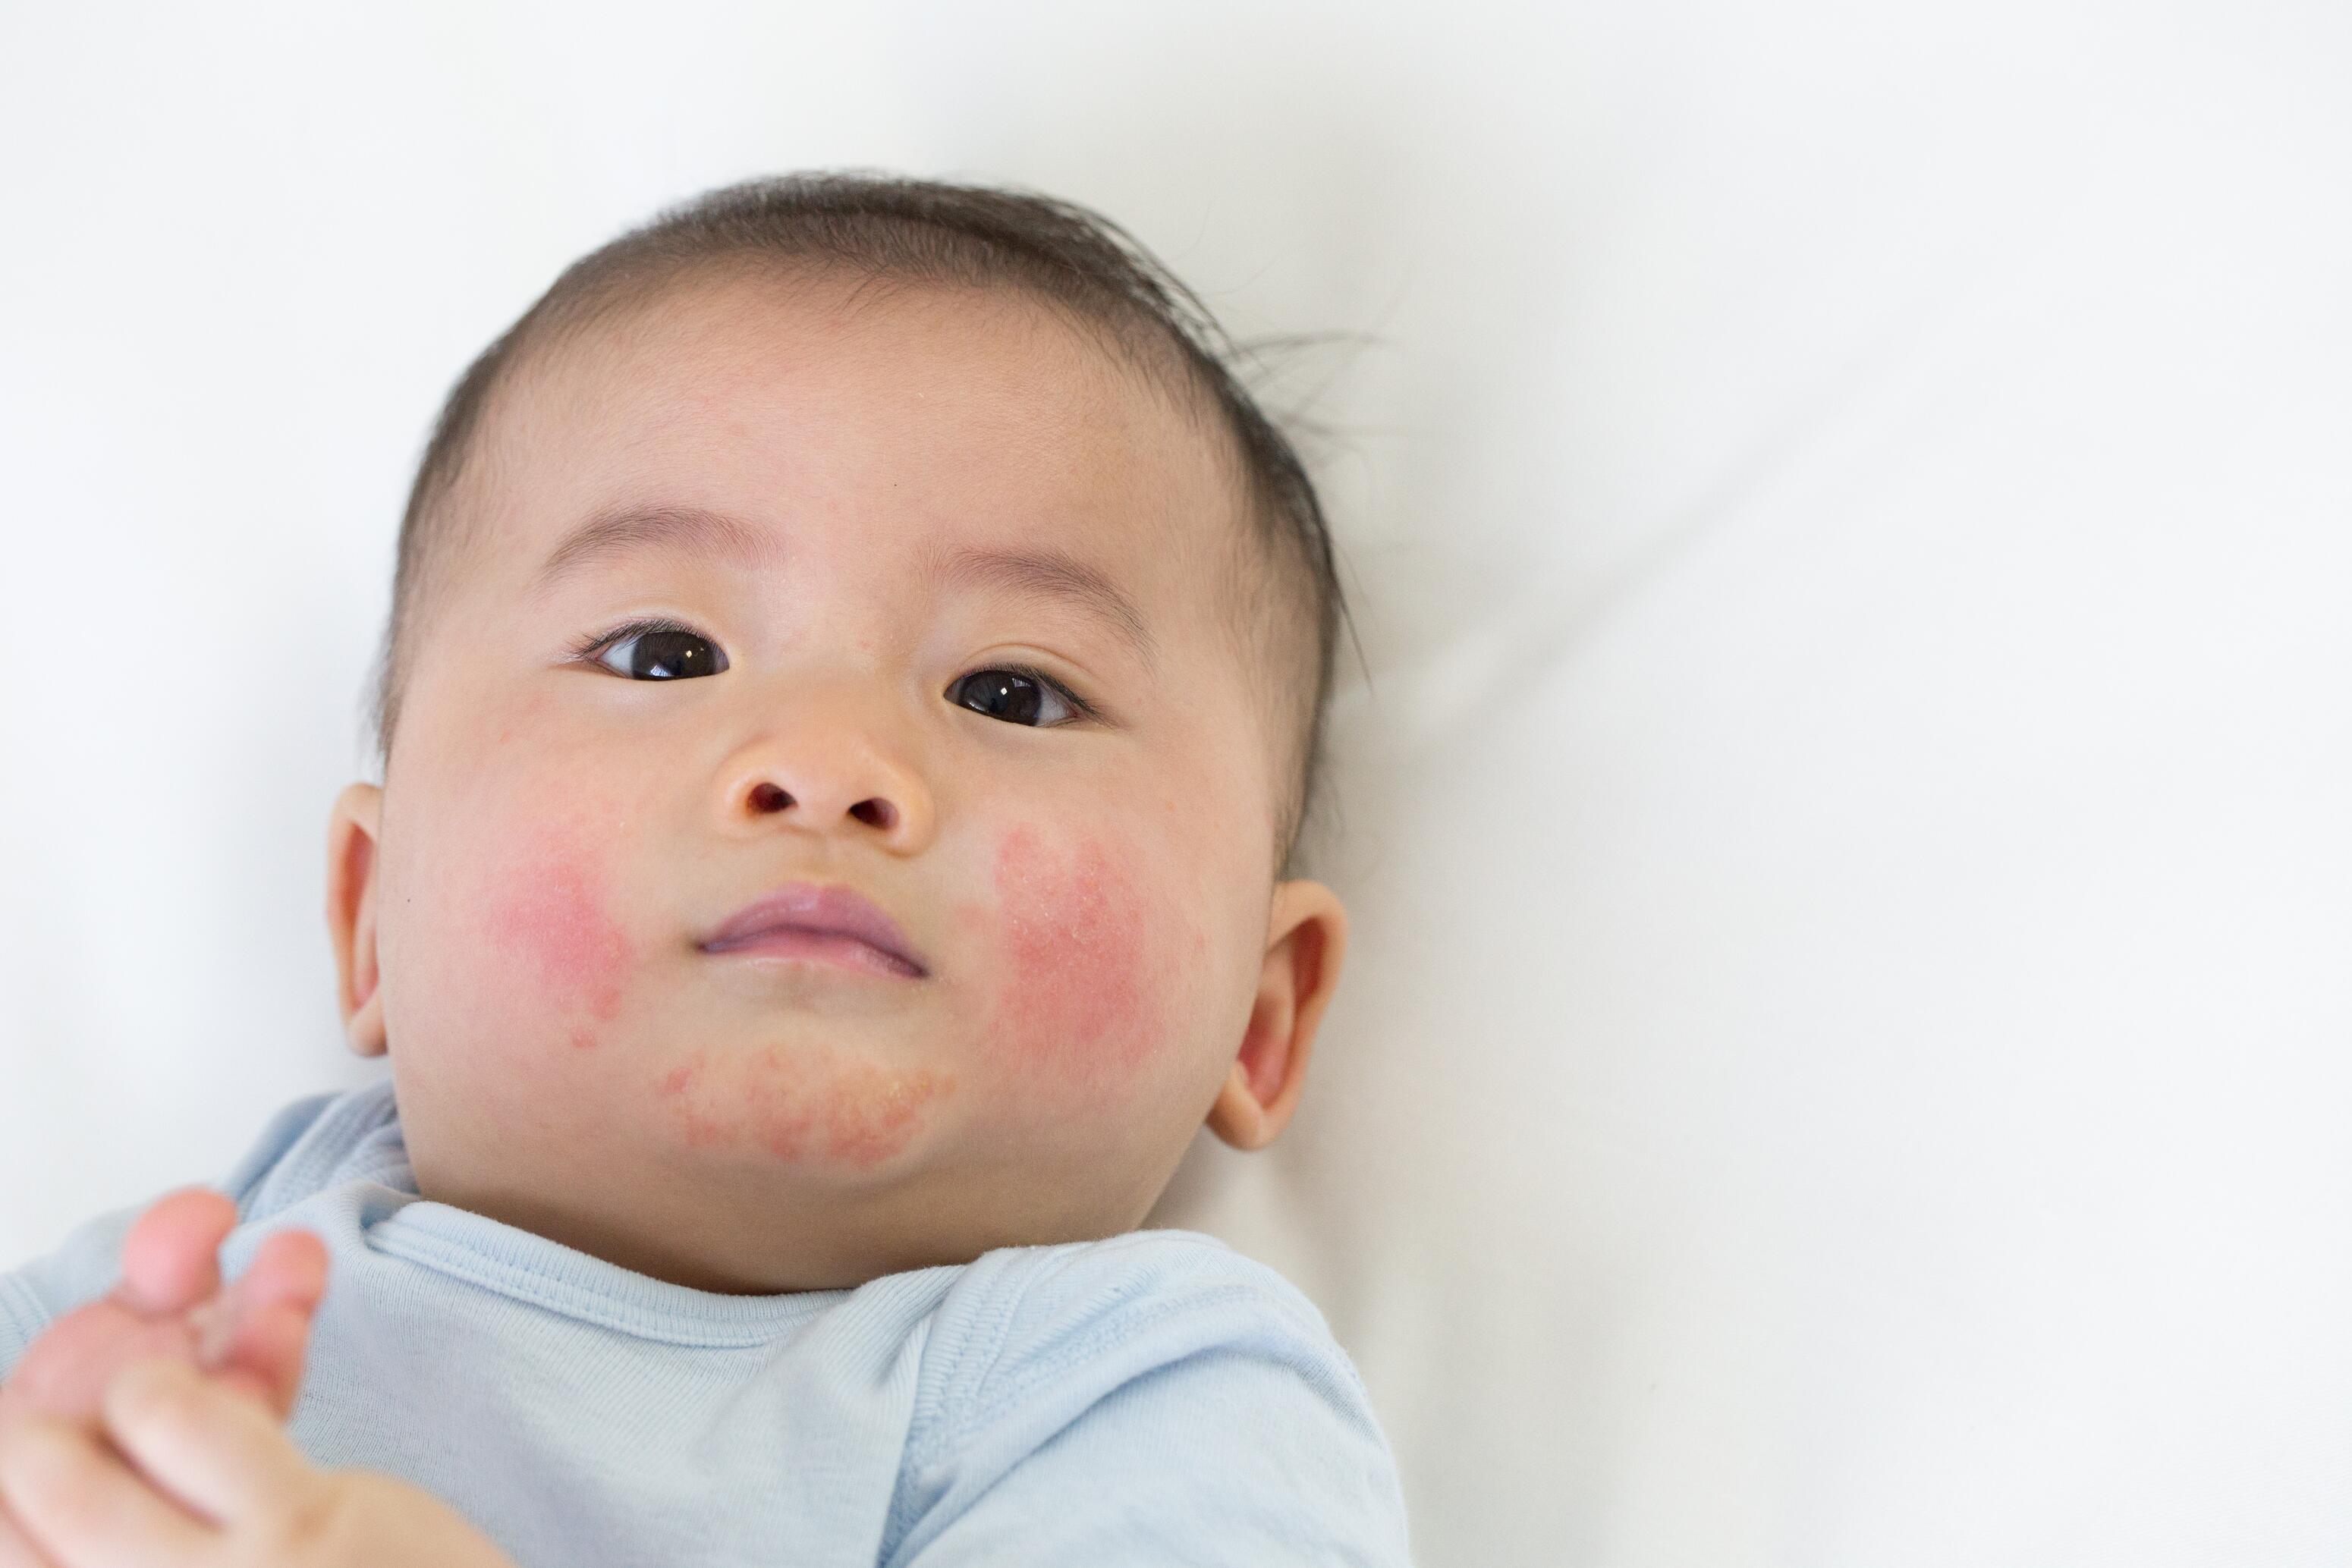 Baby with eczema patches on the face